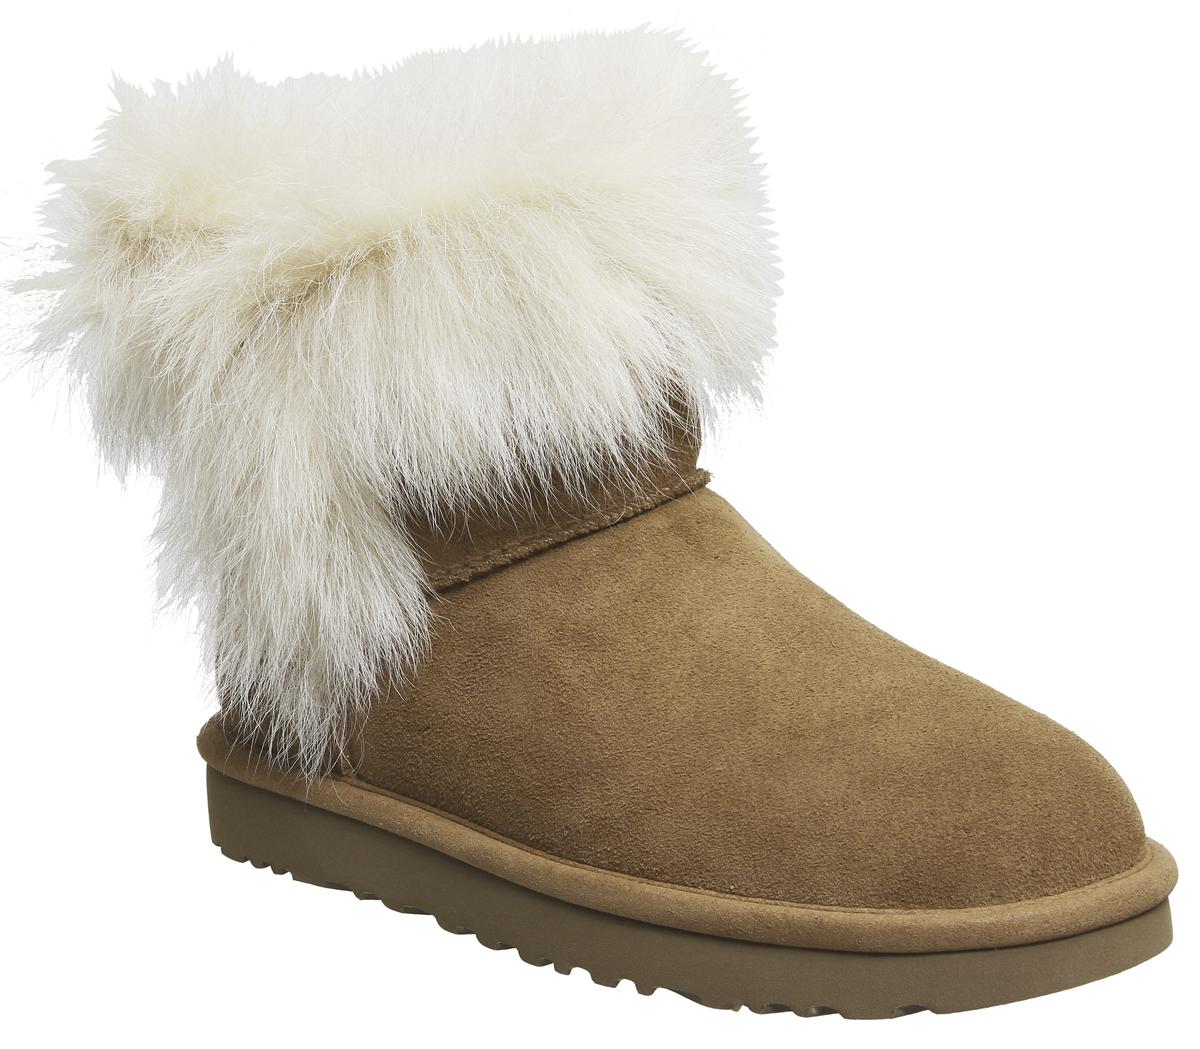 UGG Milla Fur Cuff Boots Chestnut Suede - Ankle Boots